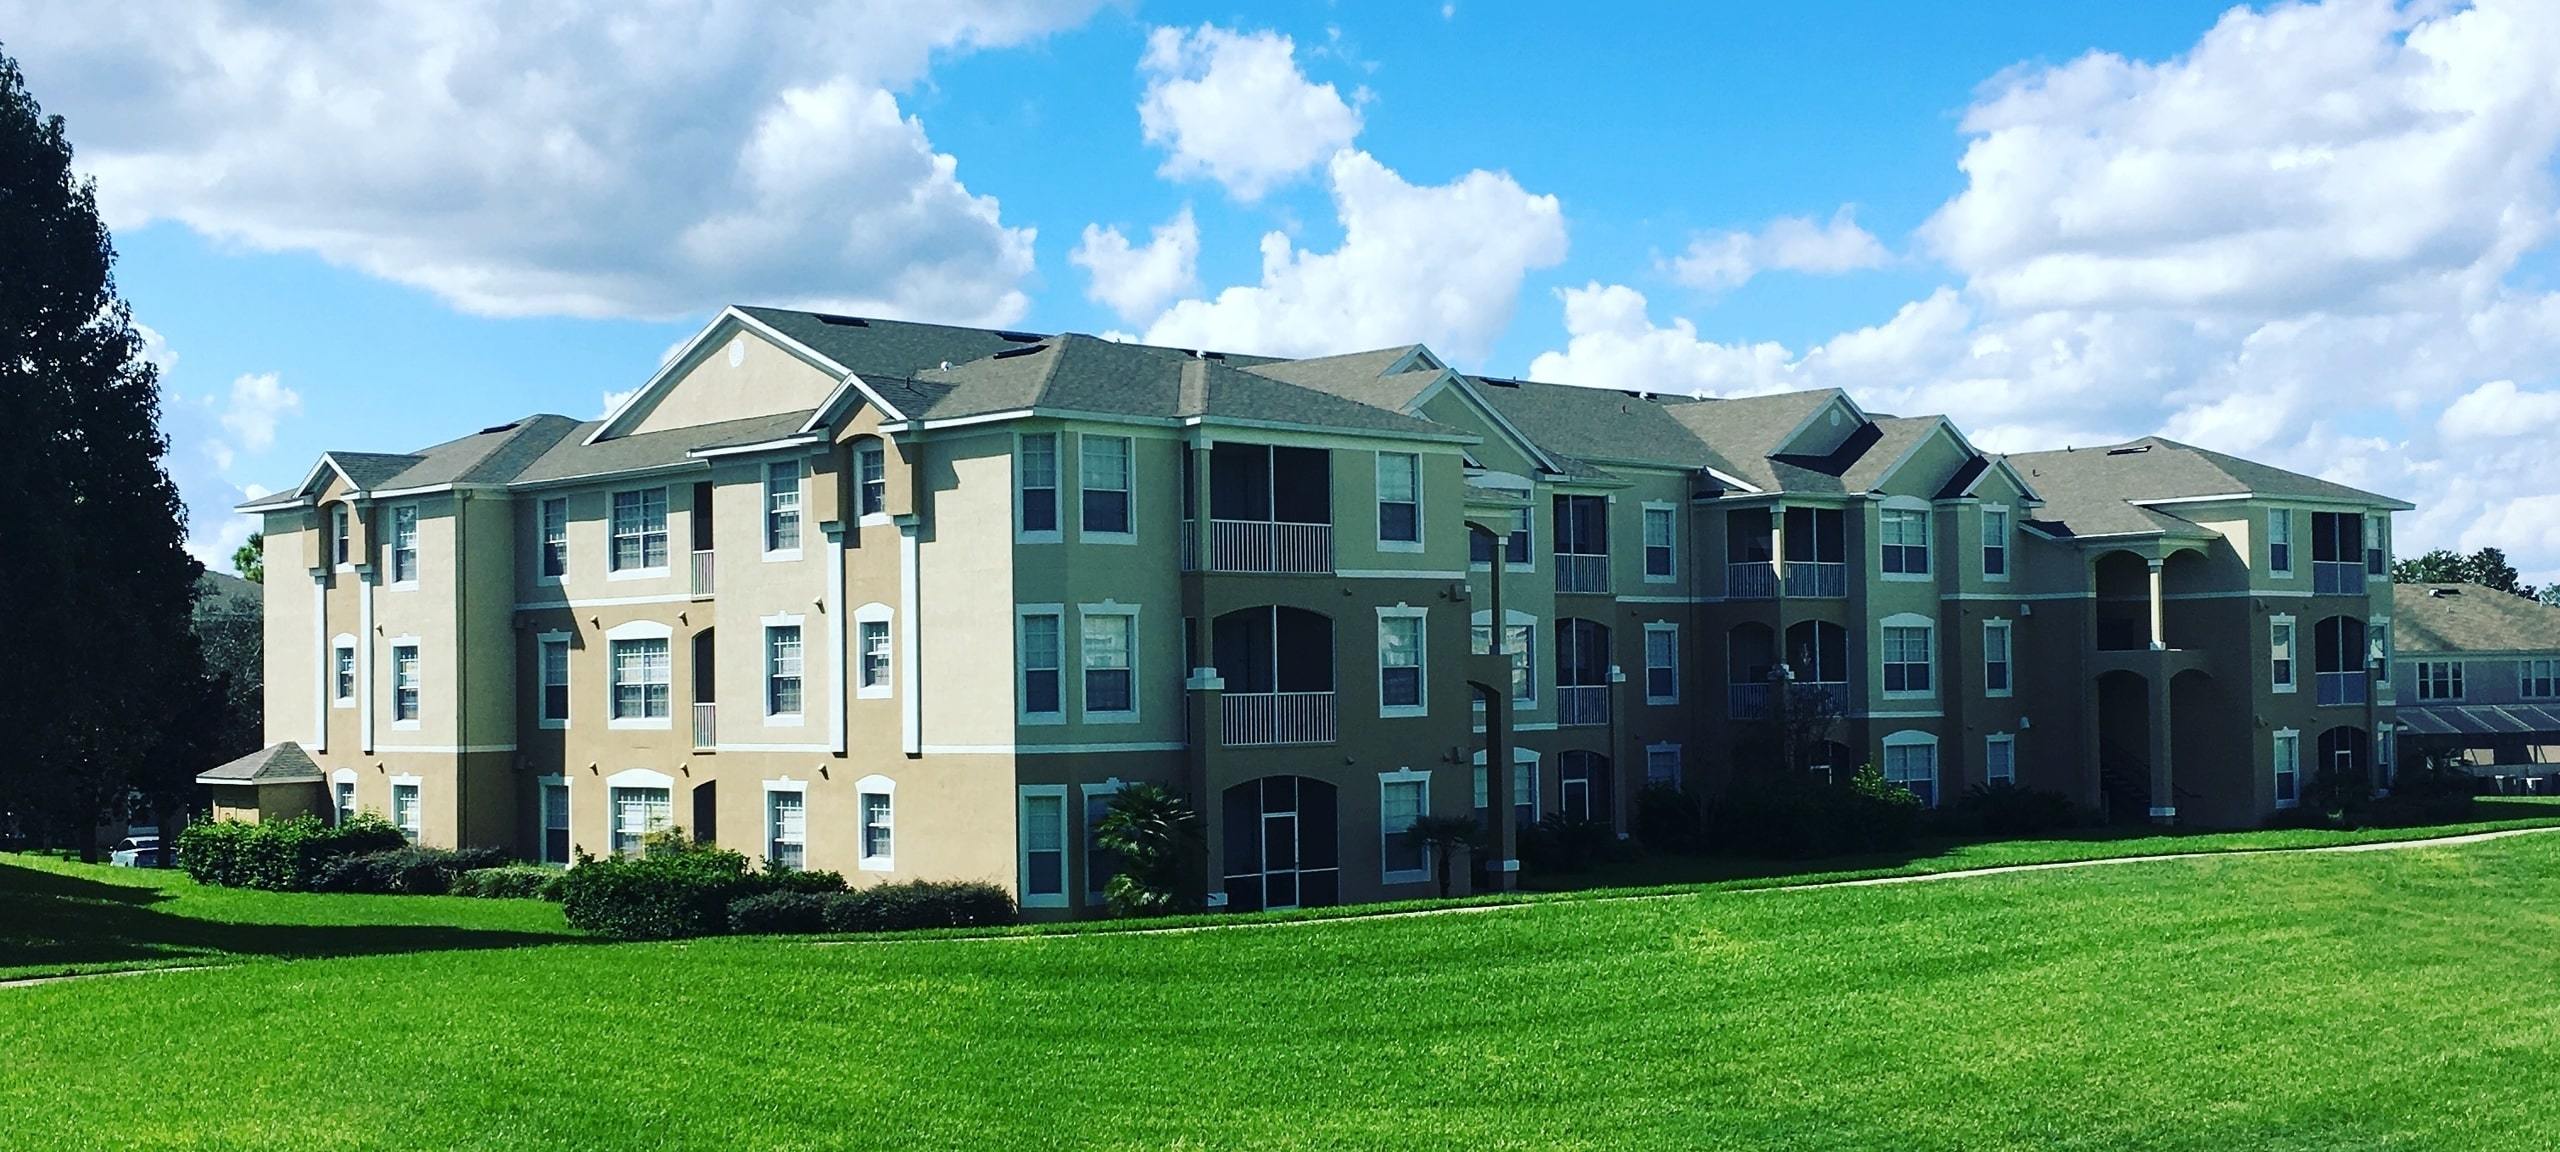 Mid-rise condo complex on green grass in Kissimmee, Florida